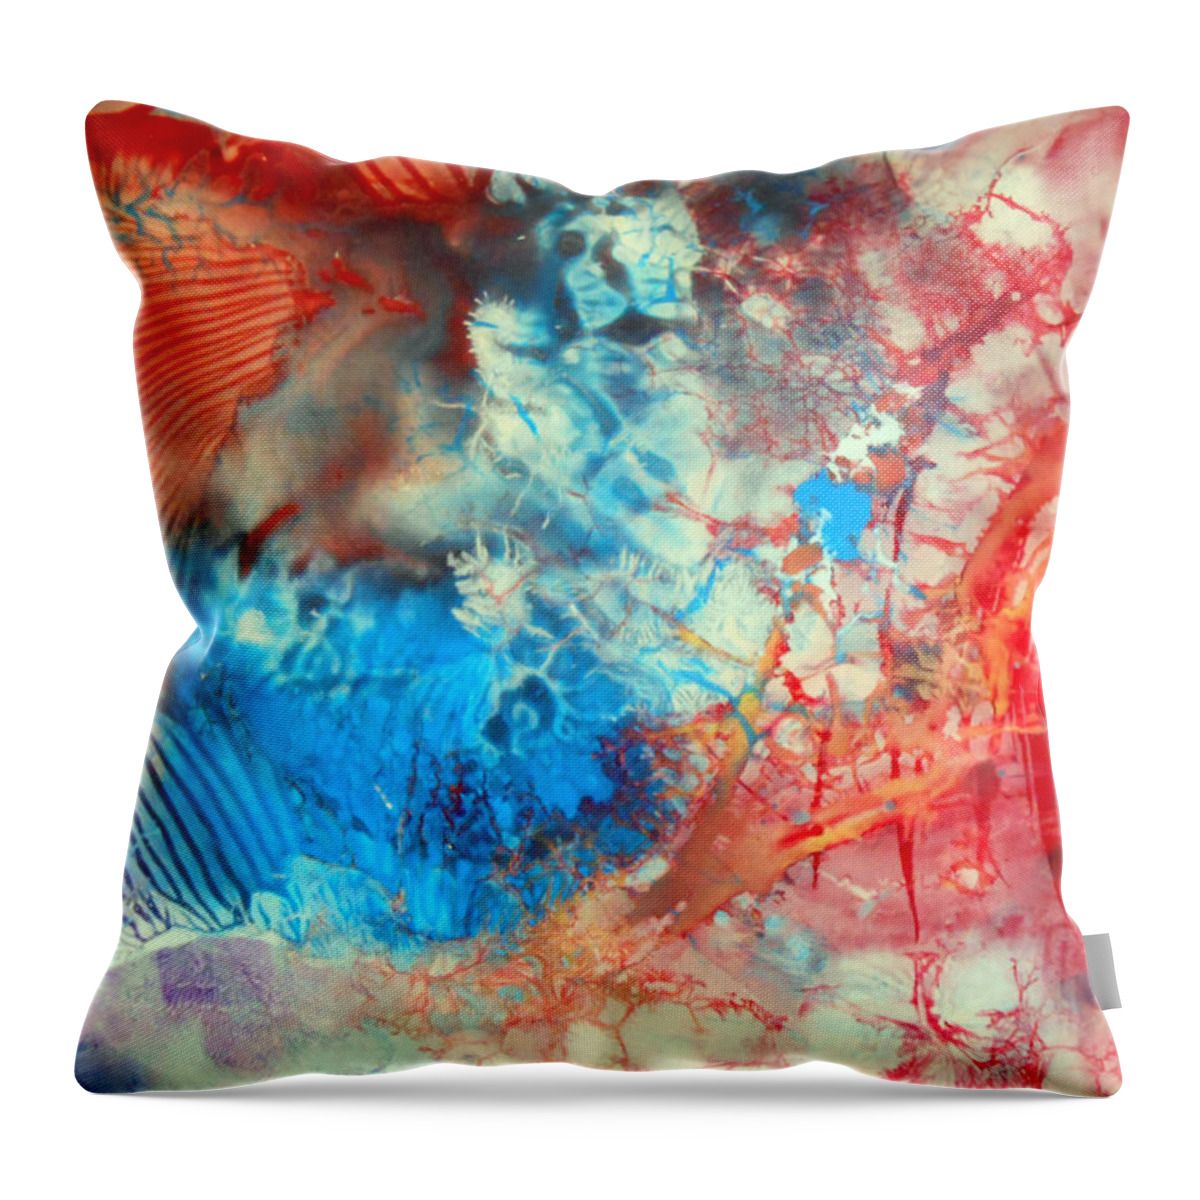 Decalcomaniac Throw Pillow featuring the painting Decalcomaniac Colorfield Abstraction Without Number by Otto Rapp